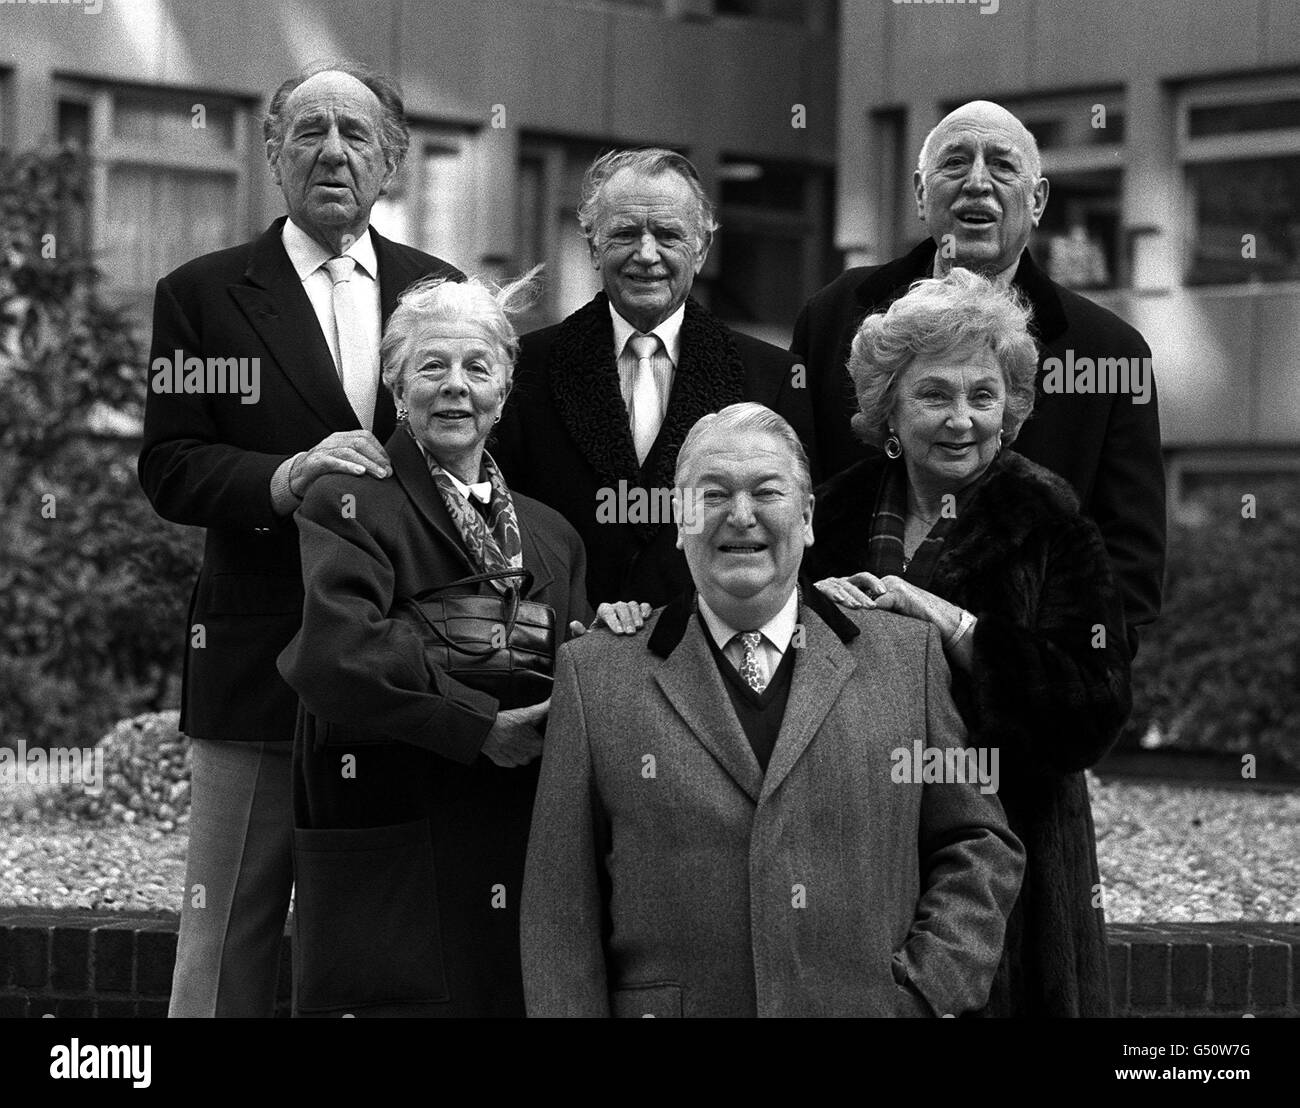 Stars of the television drama 'Ending Up', based on the novel by Kingsley Amis (front). L-R (back row): Sir Michael Hordern, Sir John Mills, and Lionel Jeffries (middle row): Dame Wendy Hiller and Googie Withers. Stock Photo